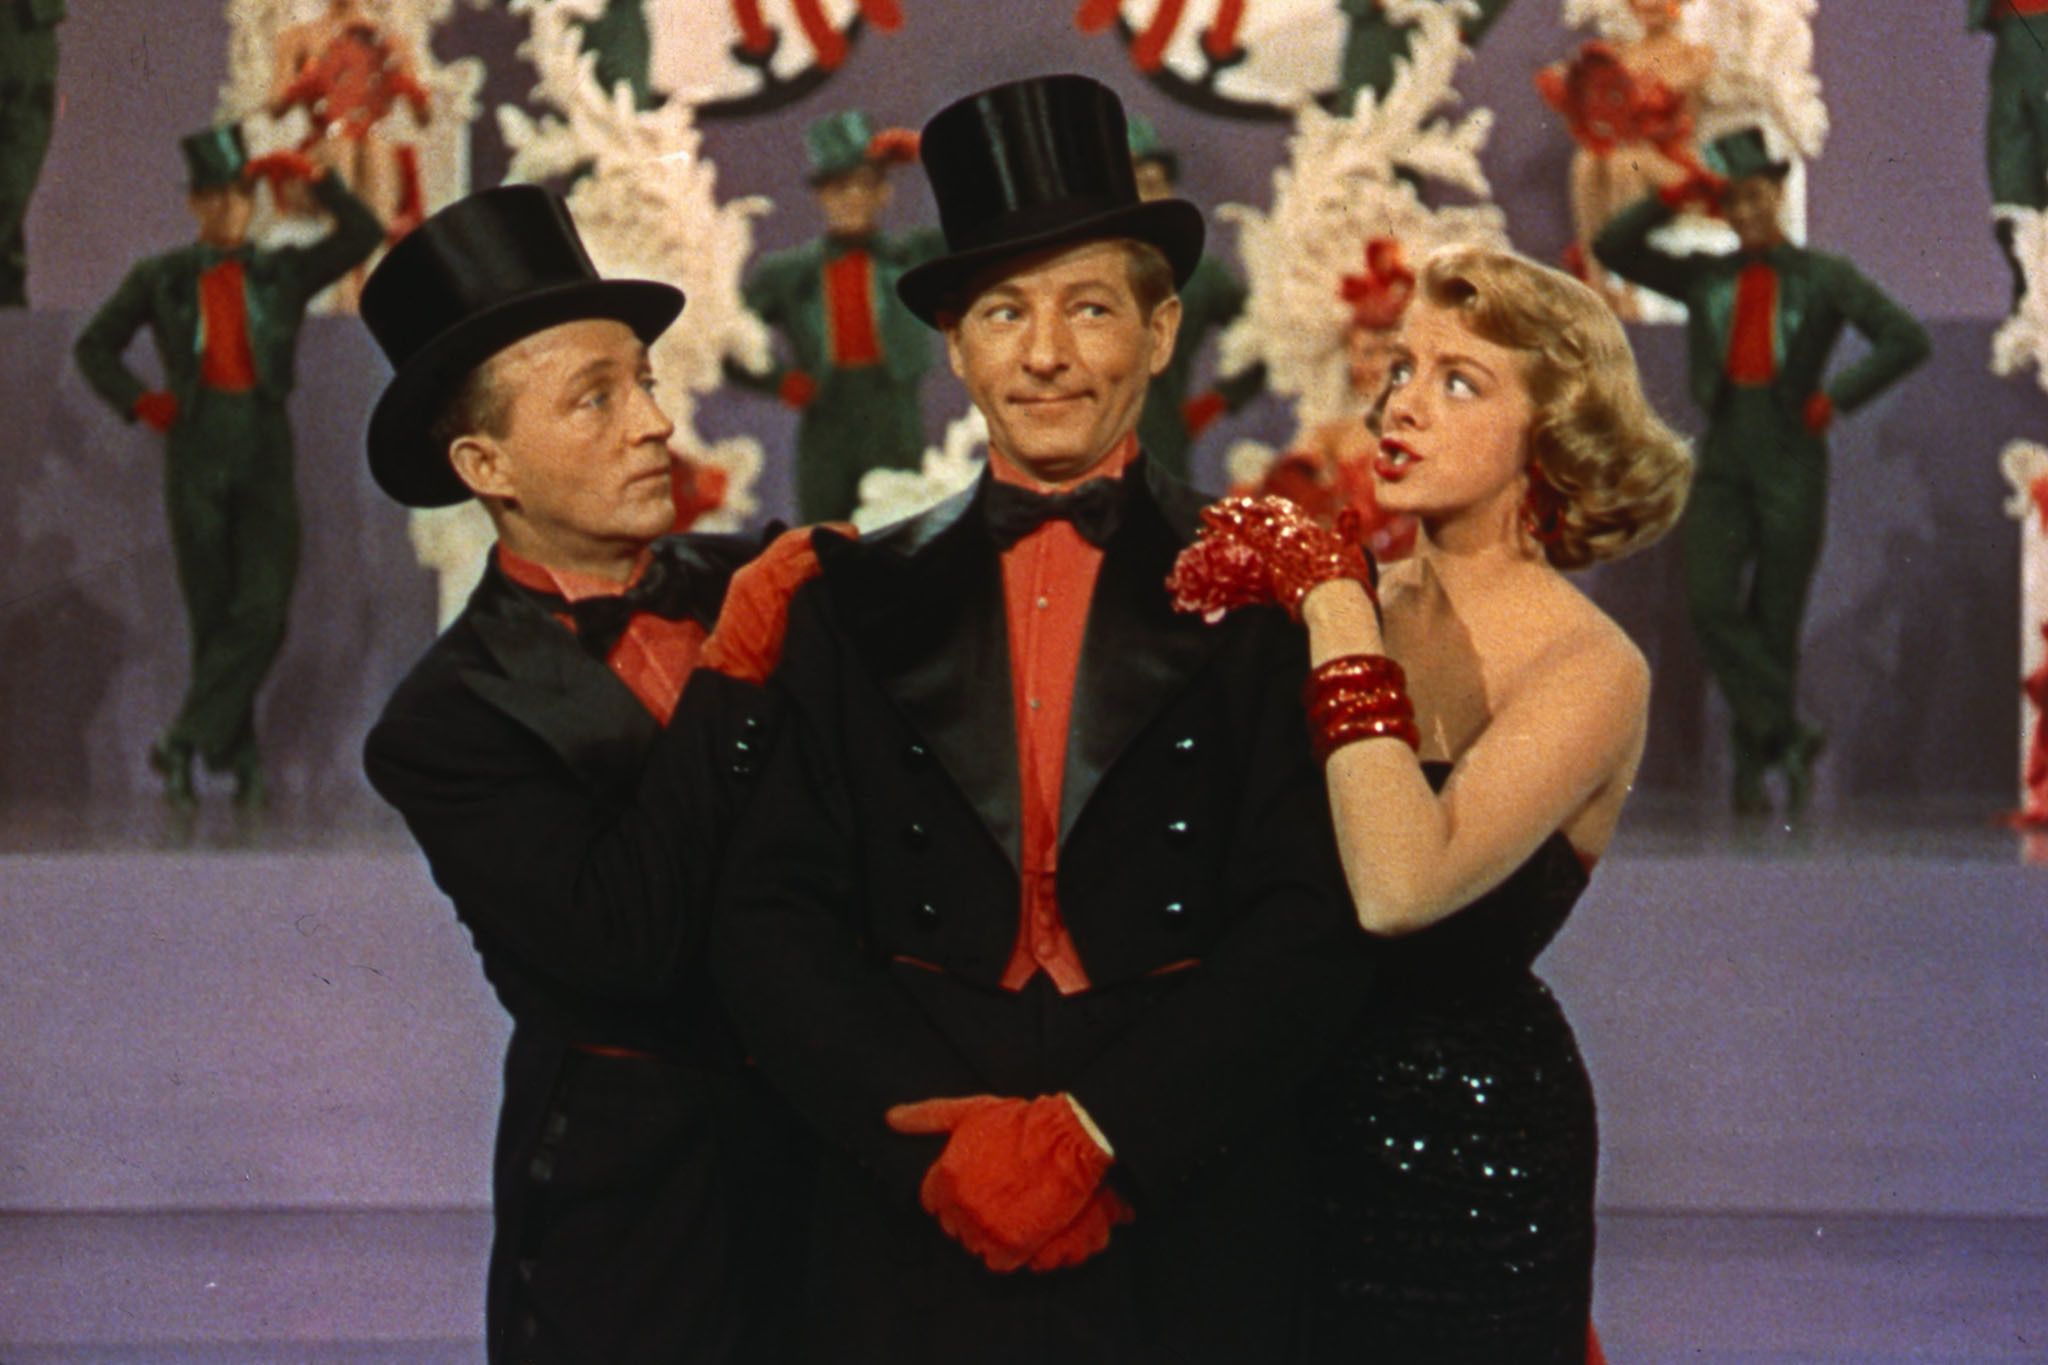 Christmas Films You Can Stream In So You Can Have A Truly Happy Holiday